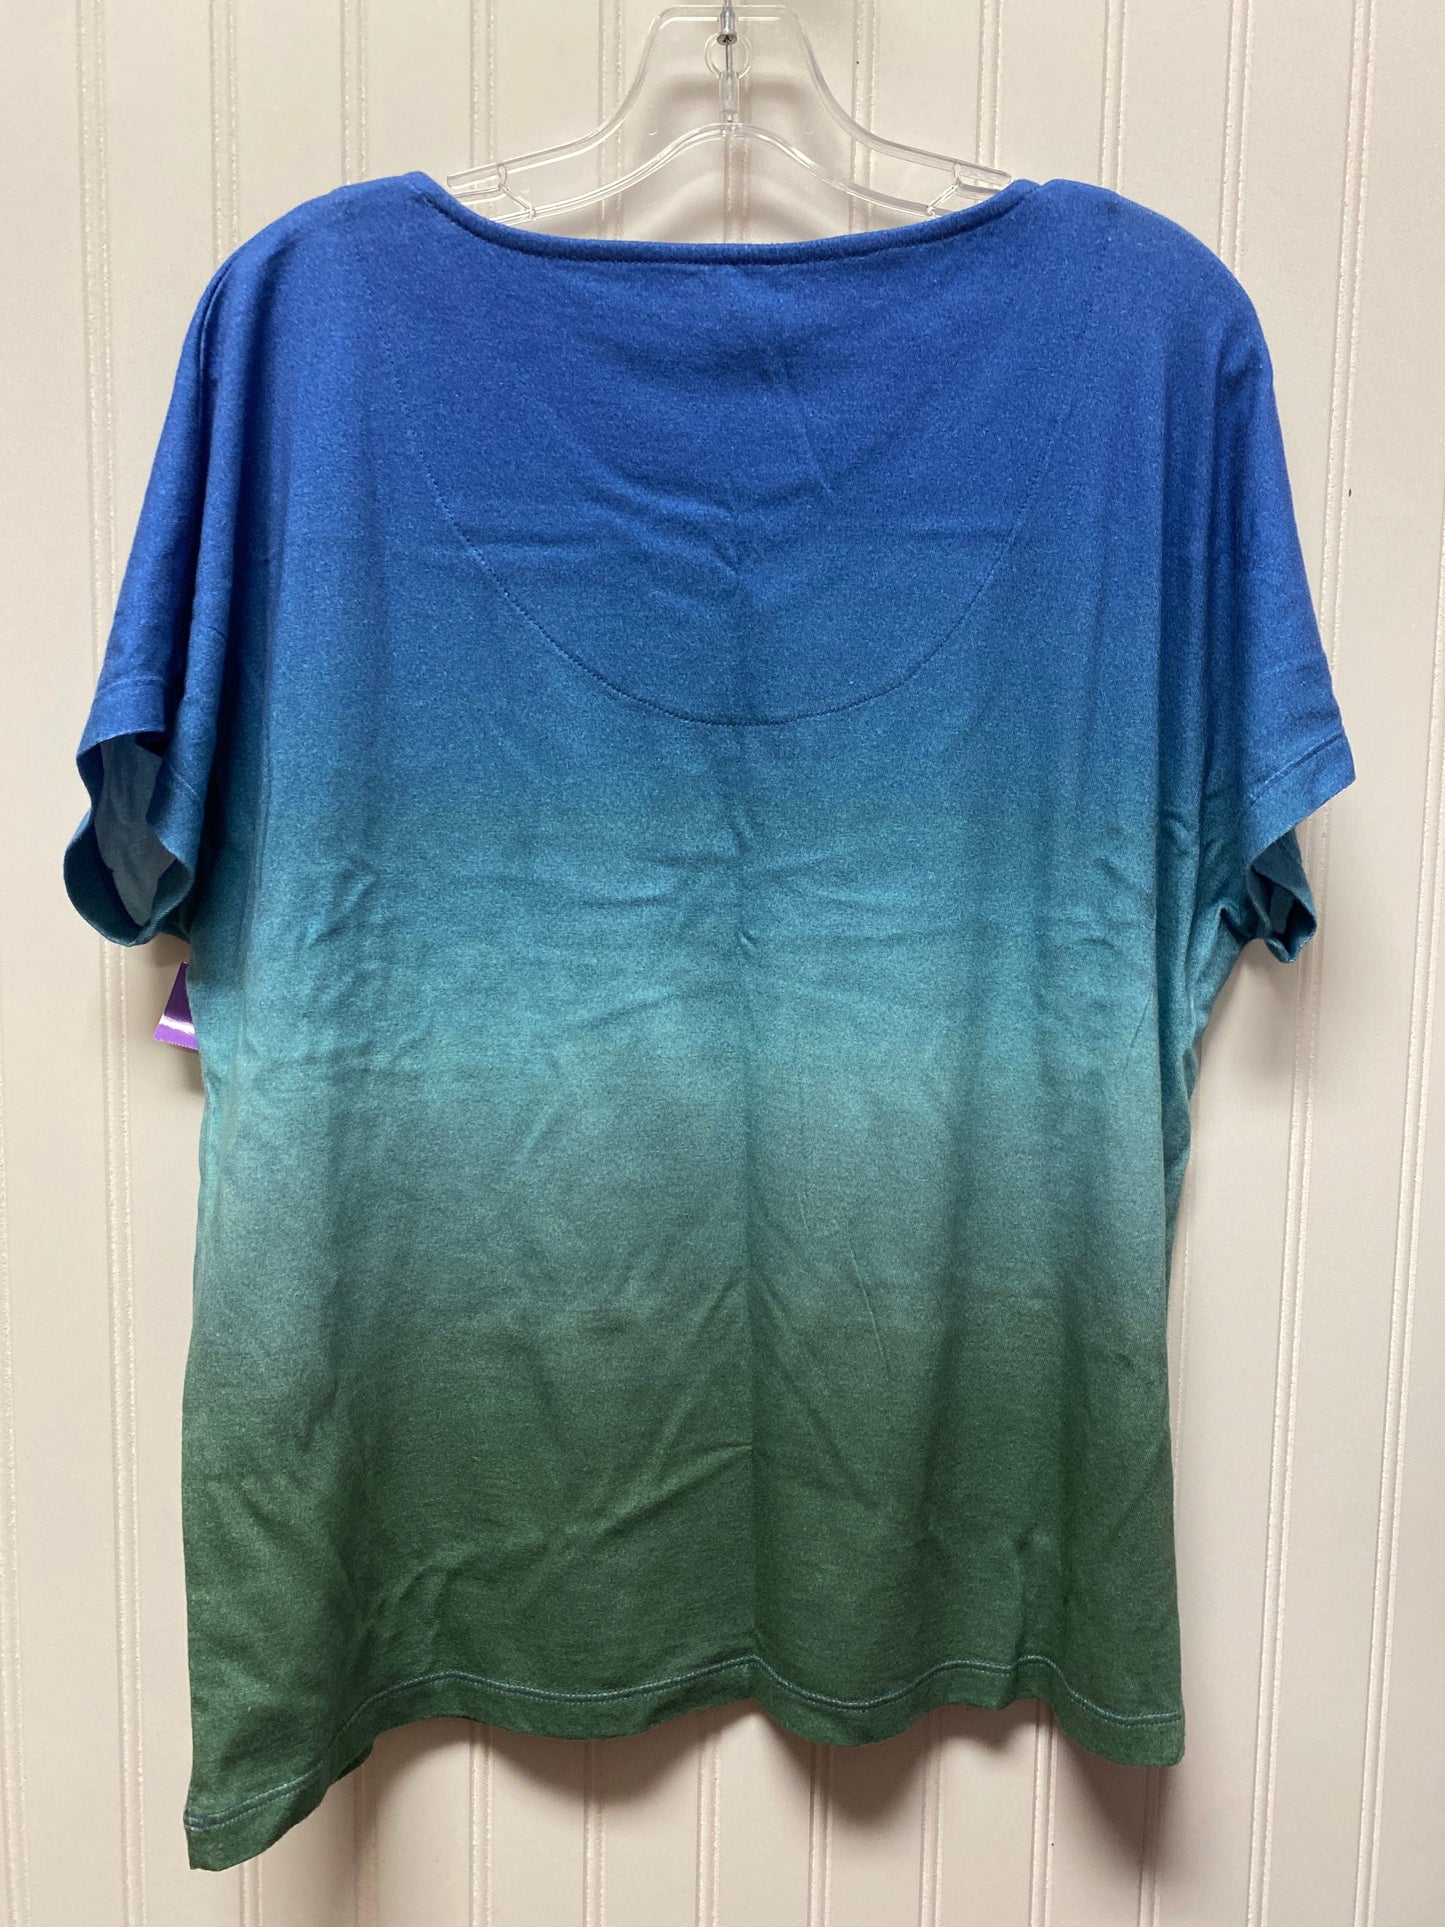 Ombre Print Top Short Sleeve Chicos, Size M